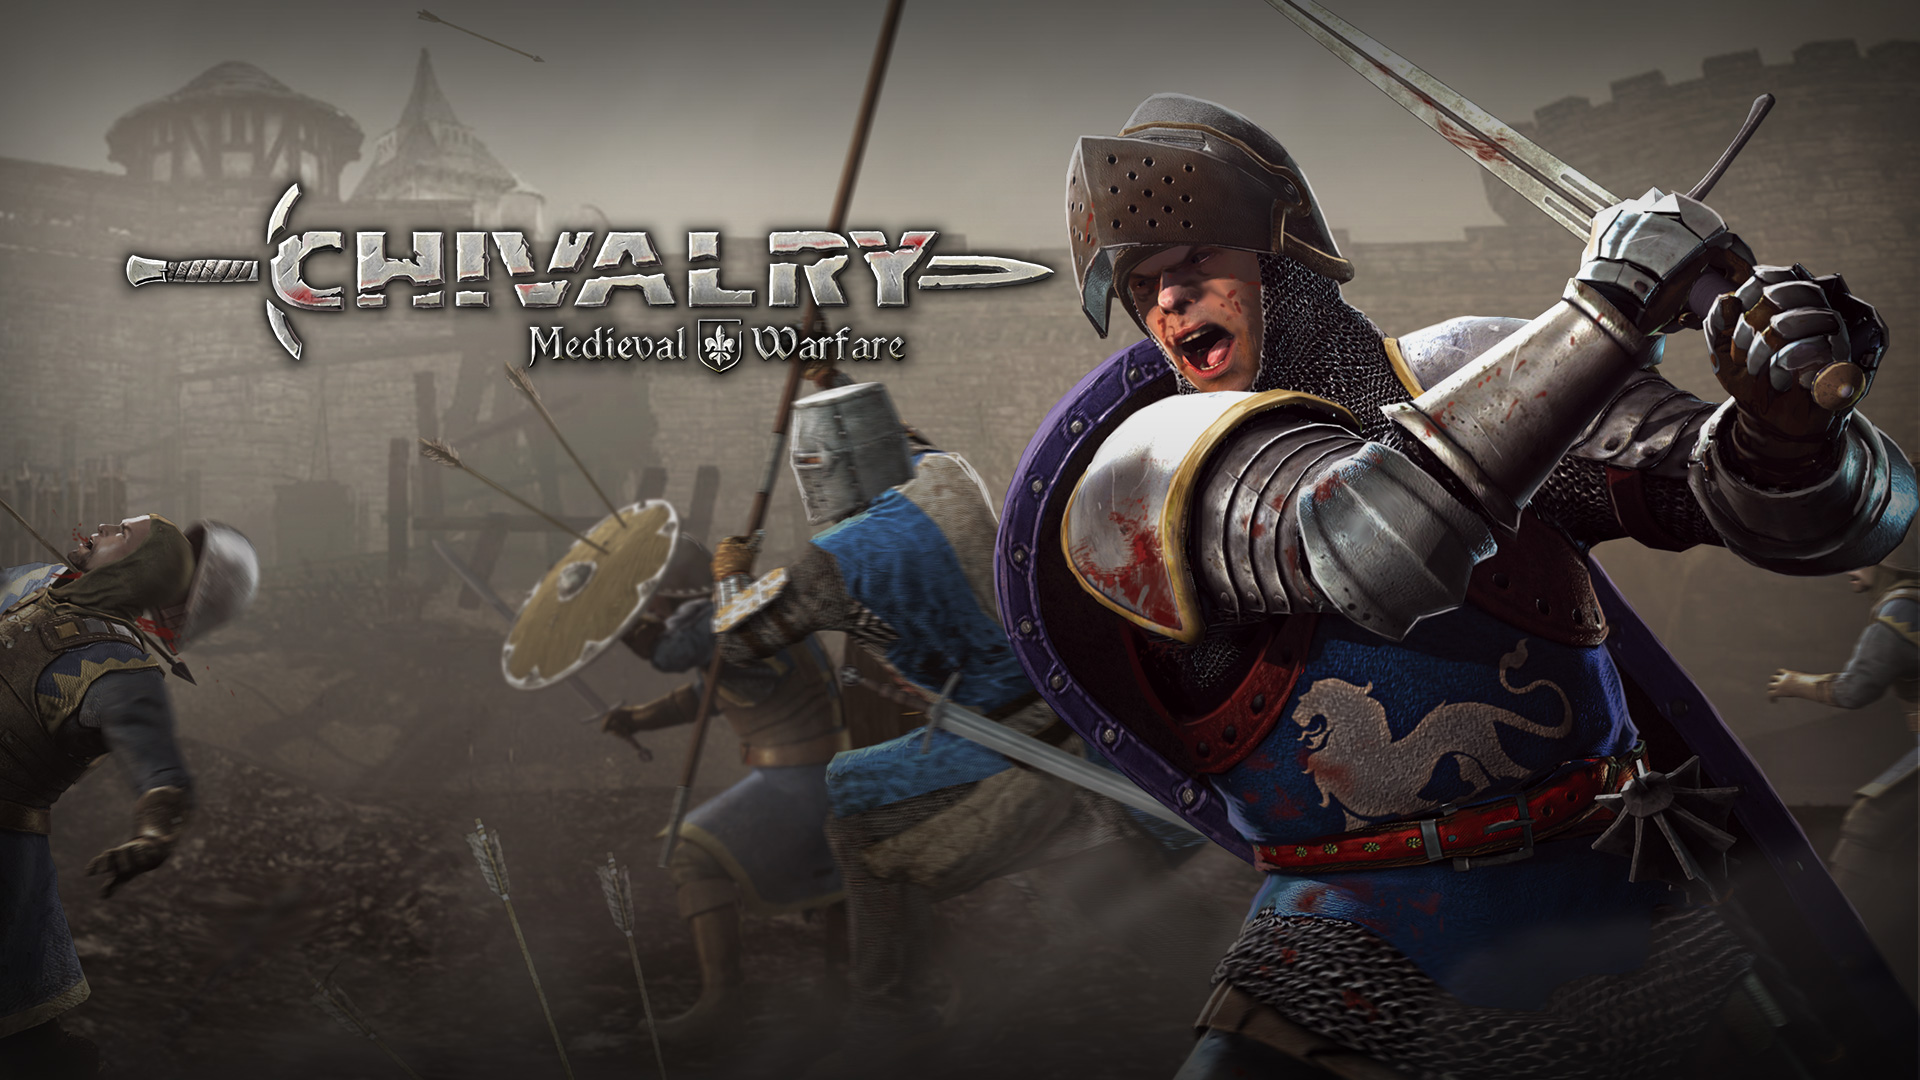 Chivalry 2 Wallpapers